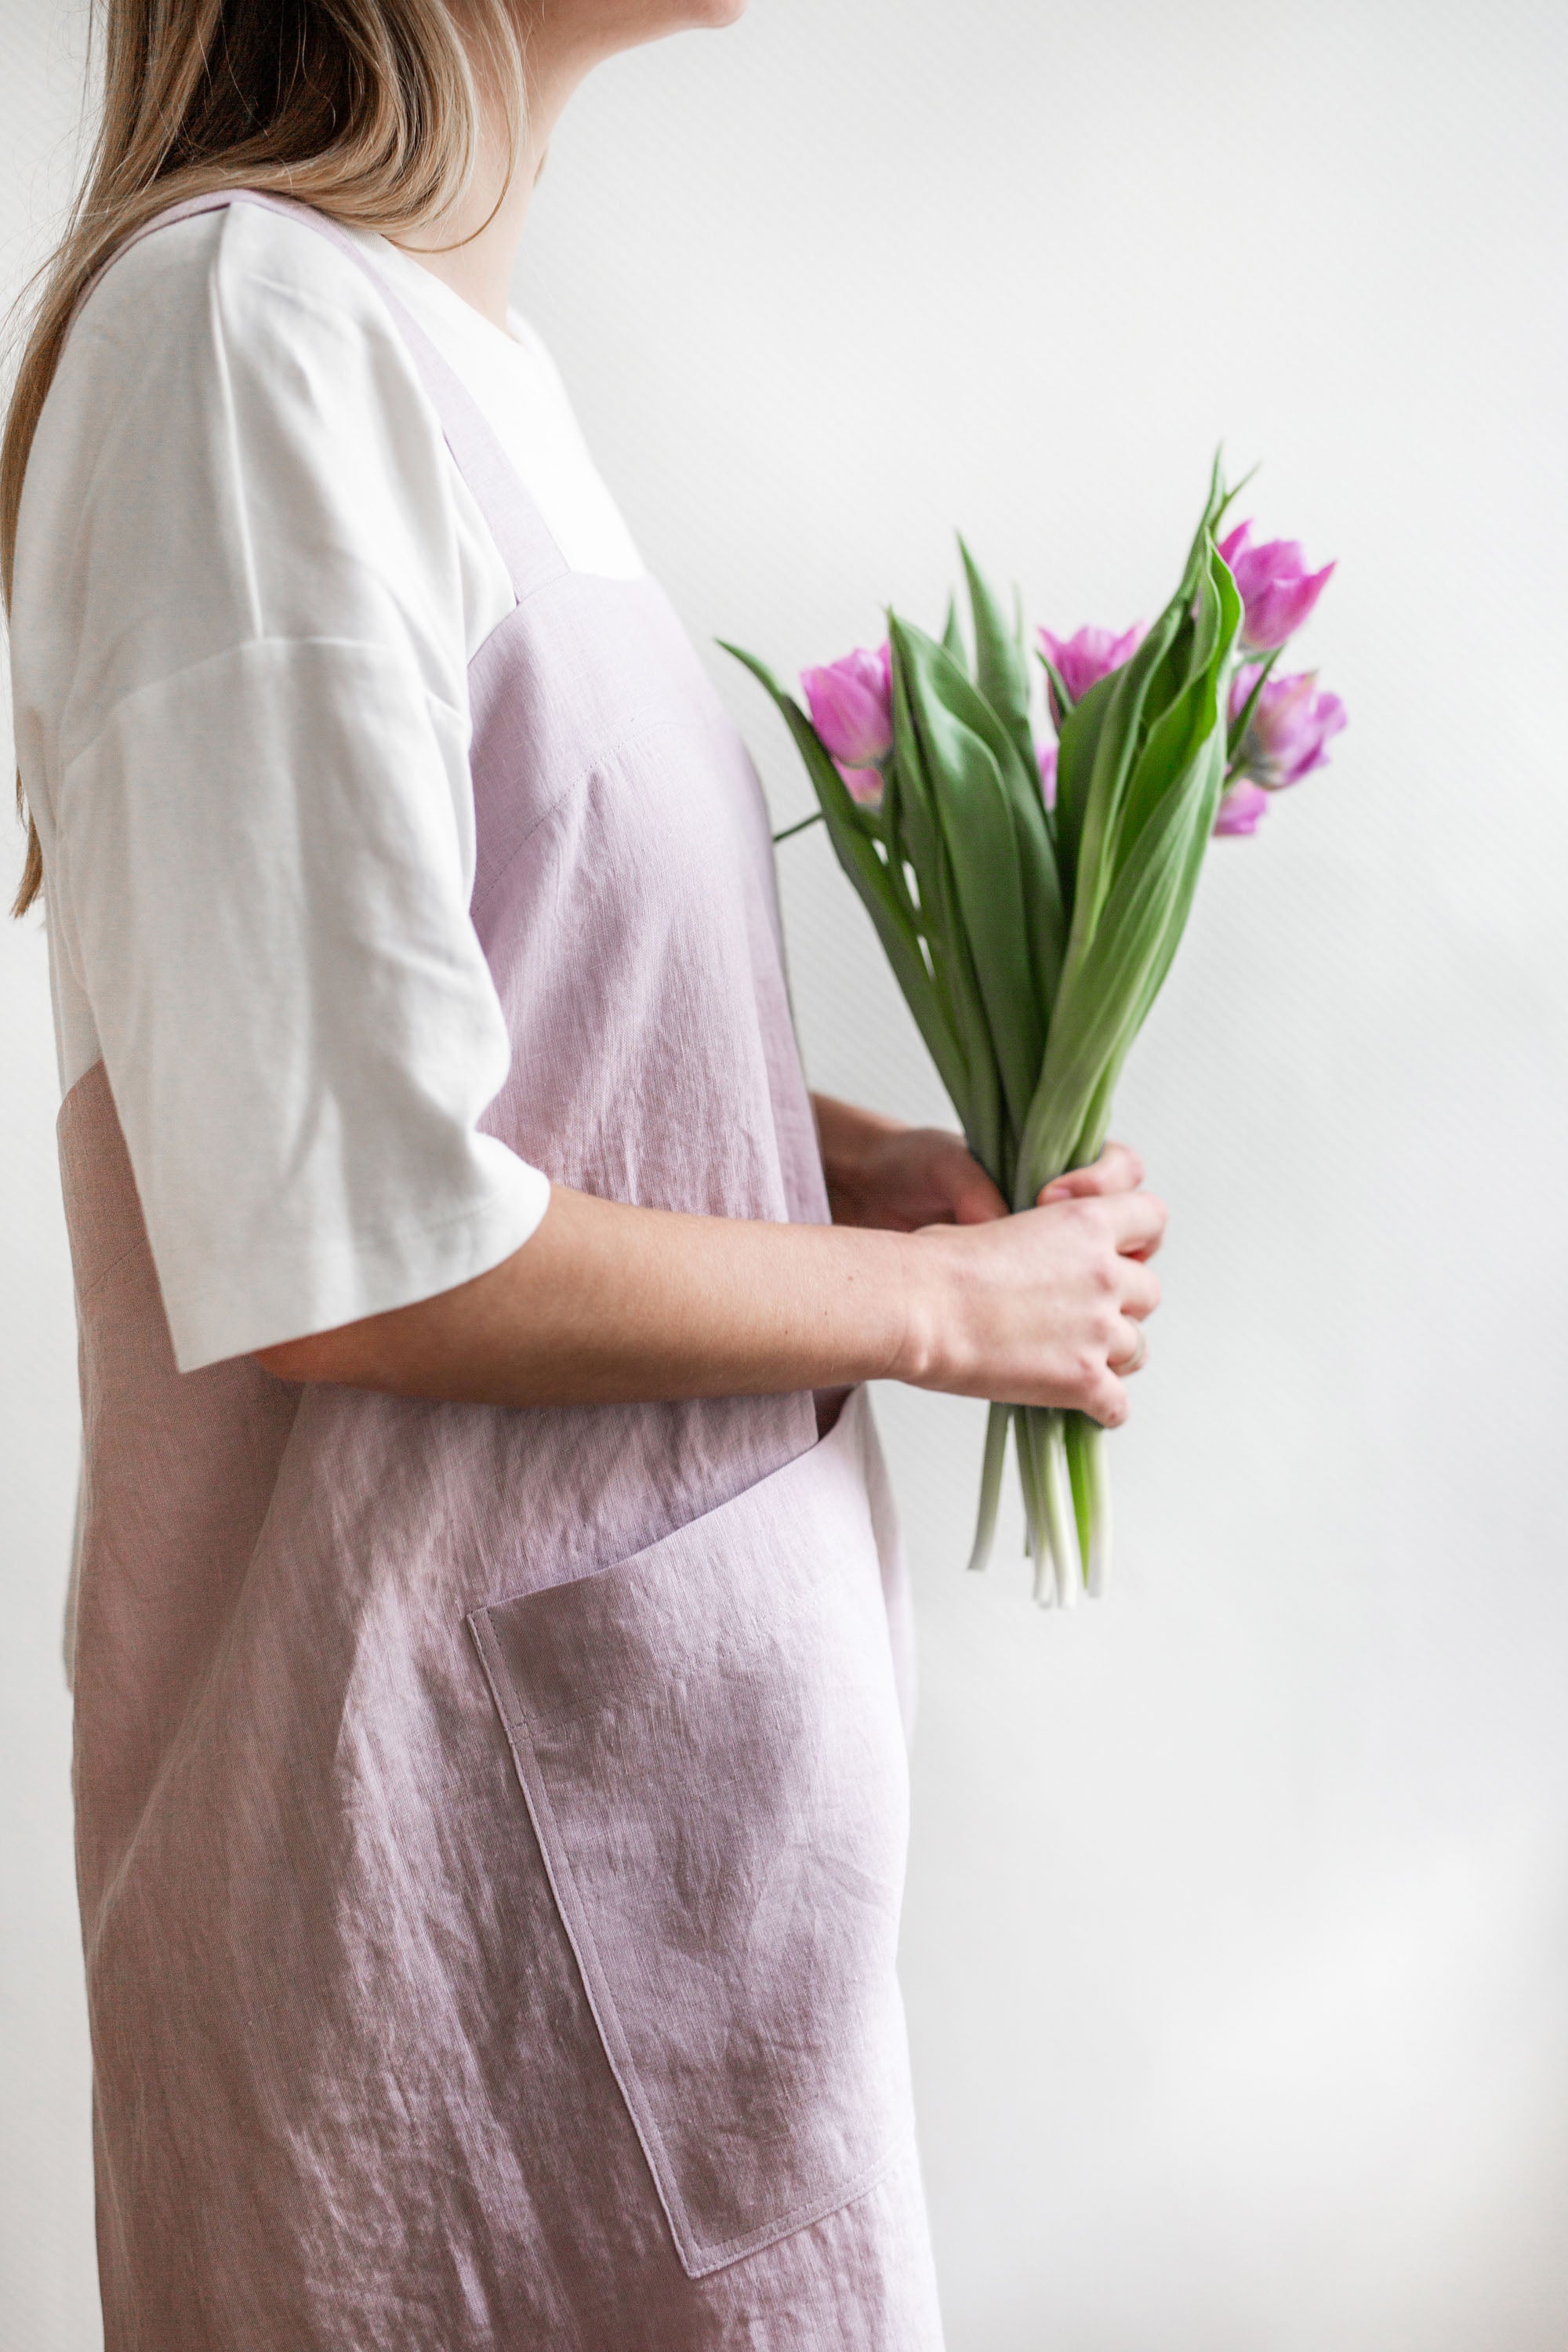 Woman Holding a Flowers Wearing Pinafore Linen Apron In Cotton Candy By AmourlInen